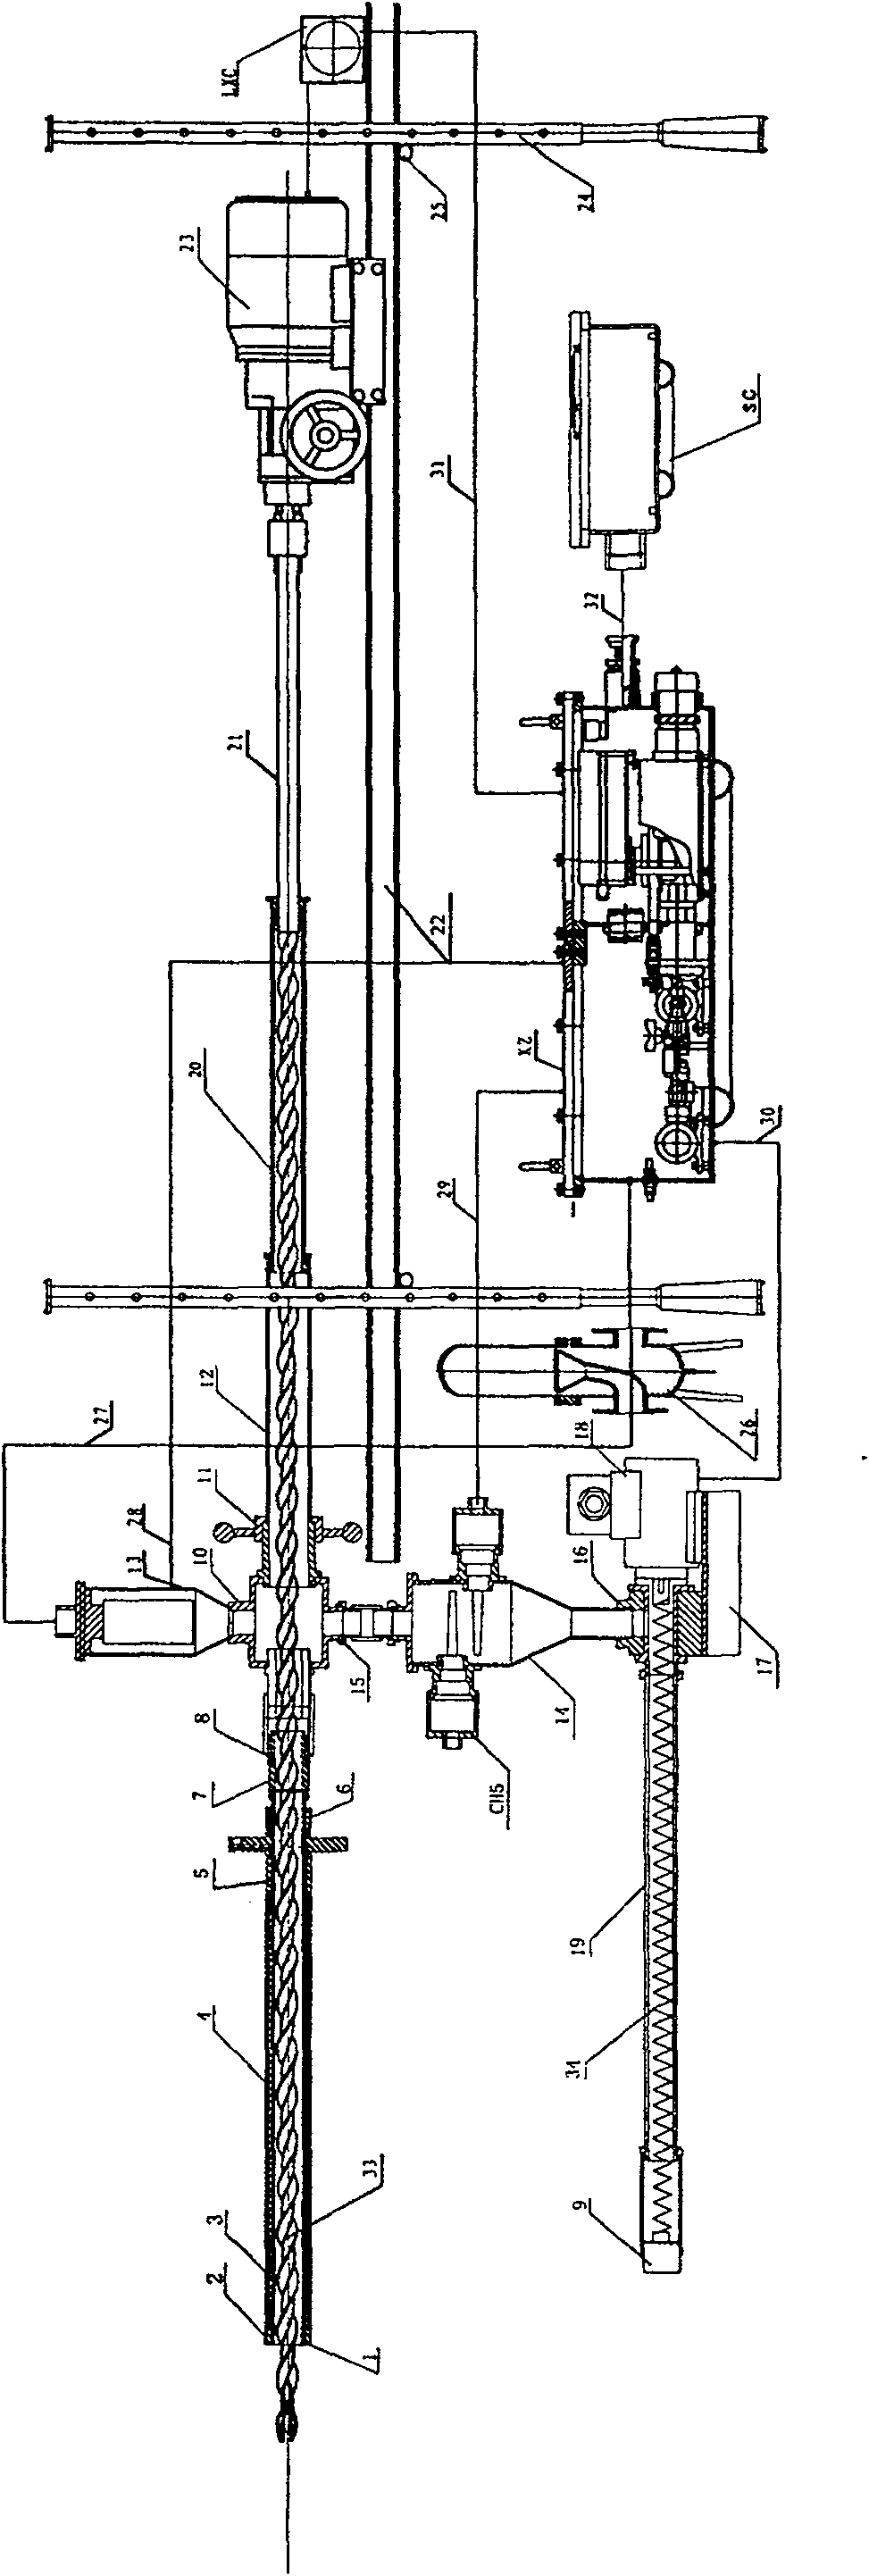 Continuous drilling flowrate process capable of predicting coal draft outburst and its apparatus